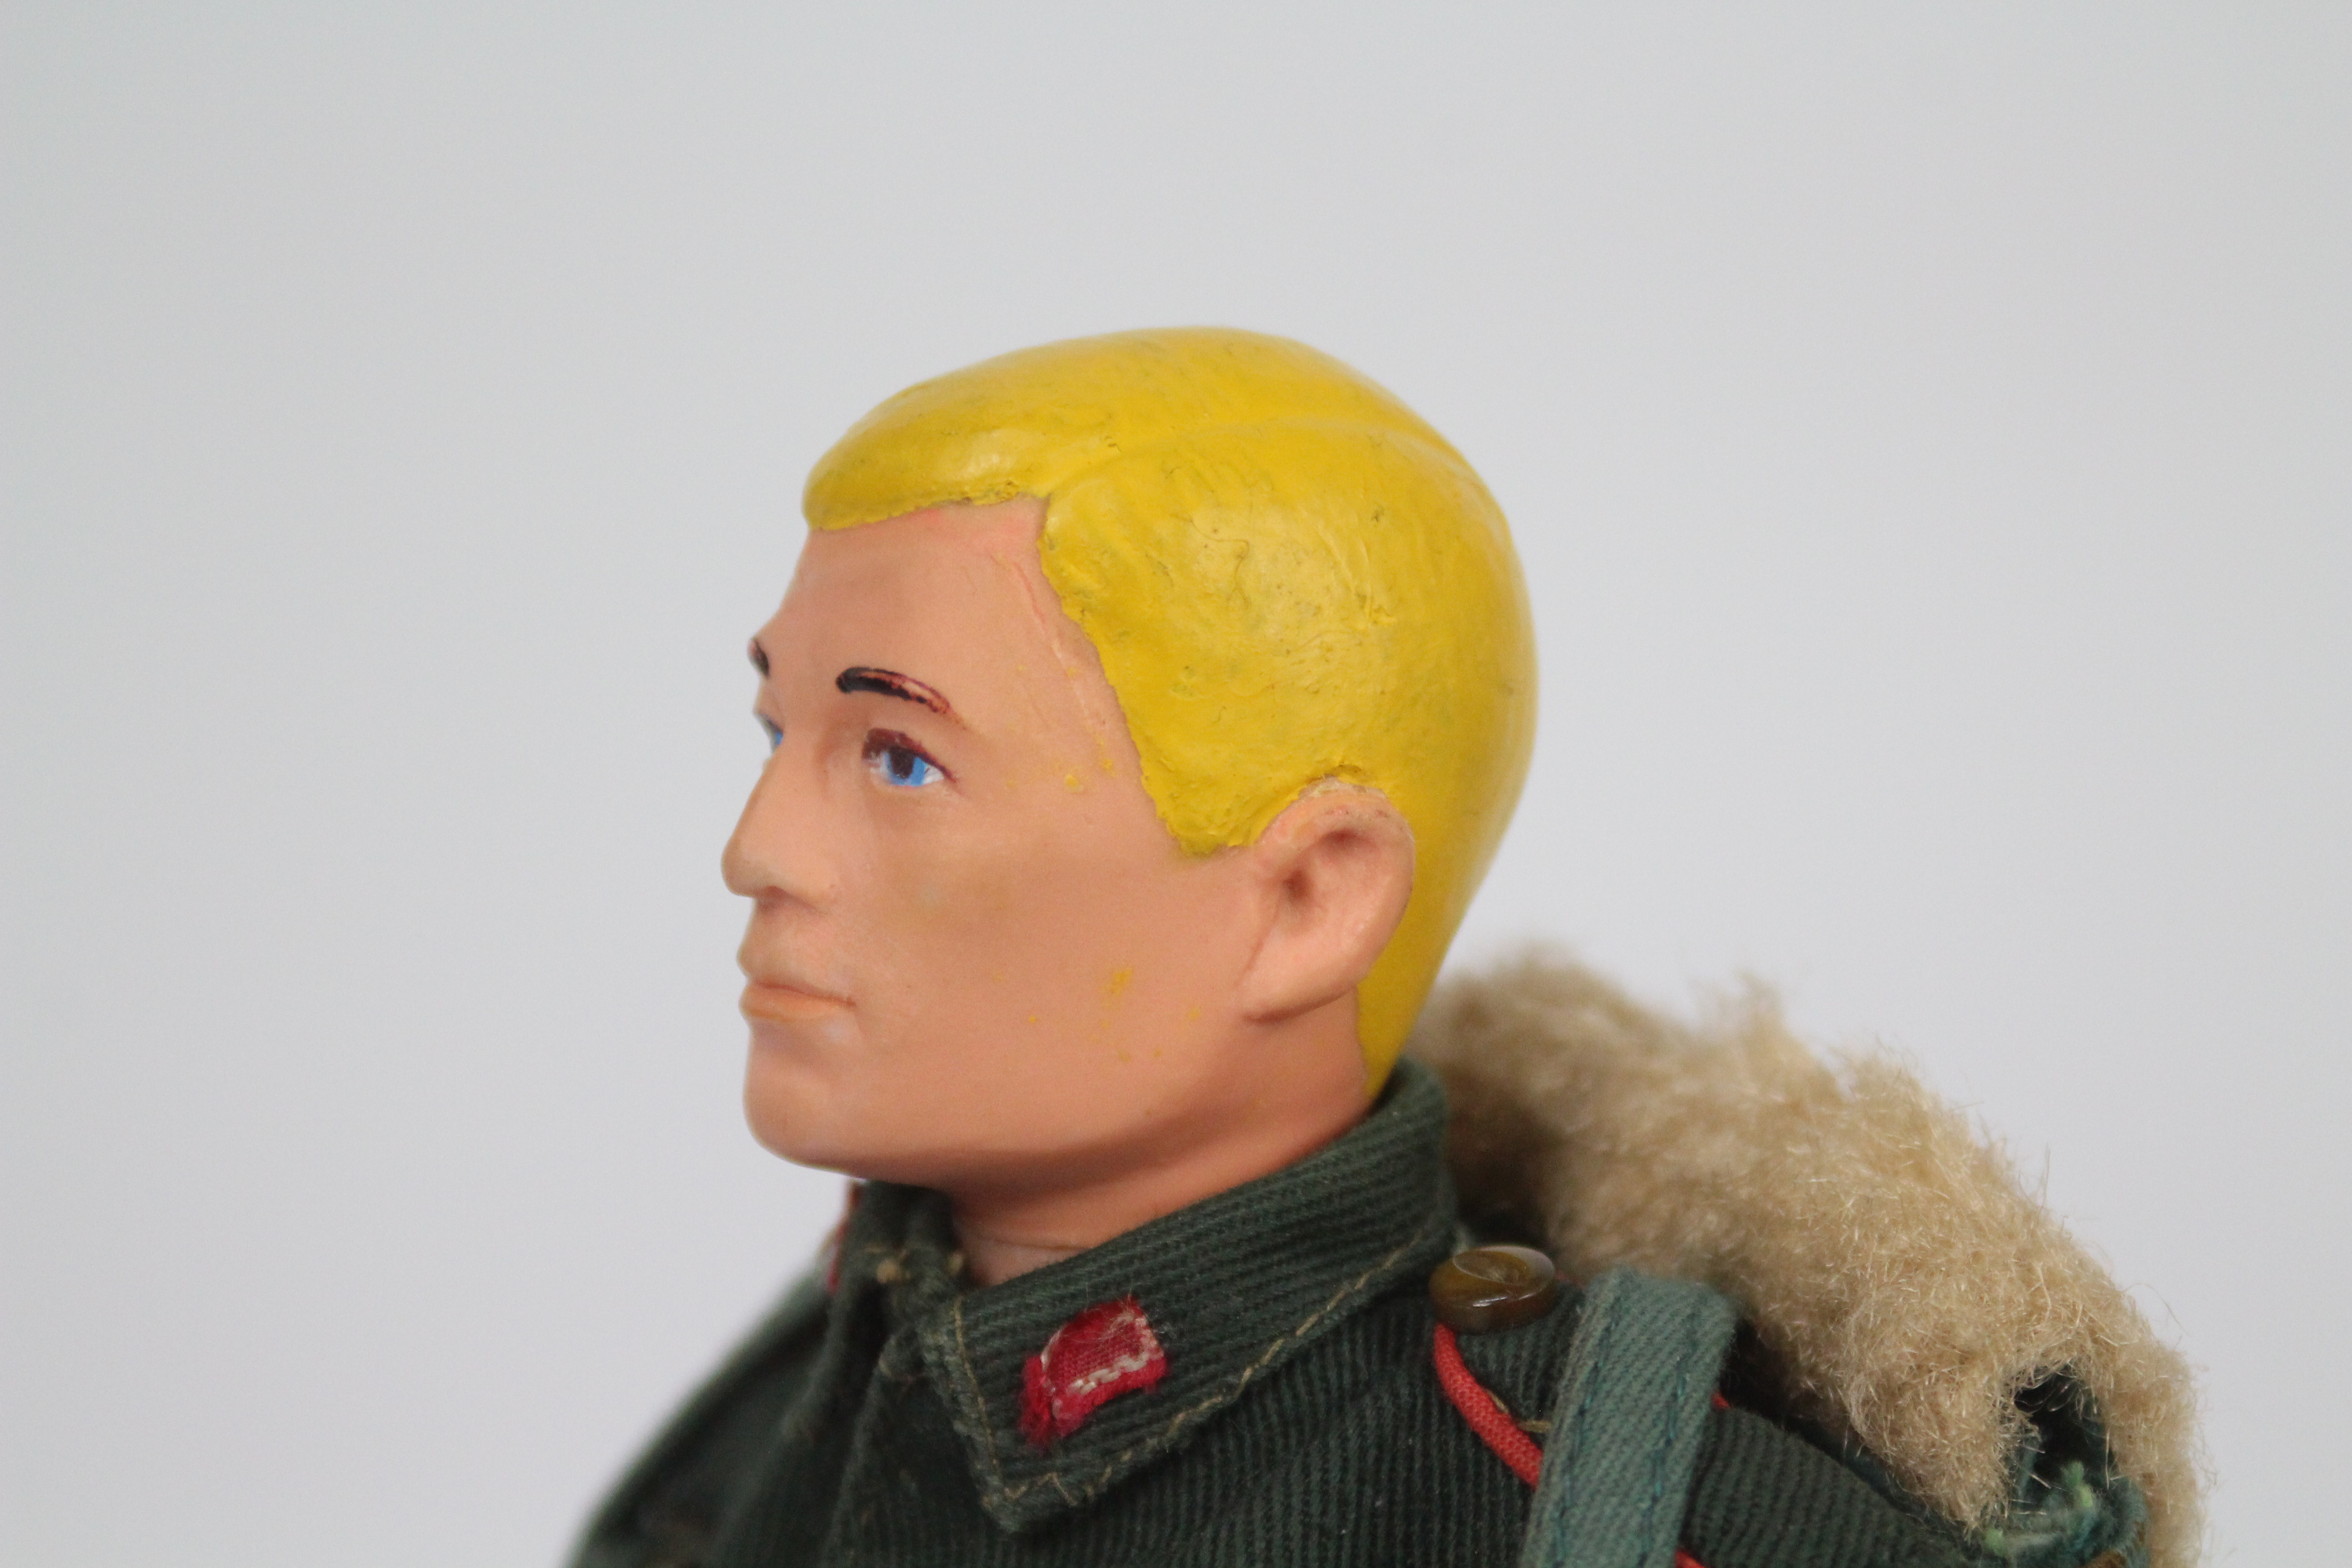 Palitoy, Action Man - A Palitoy Action Man in German Stormtrooper outfit. - Image 7 of 9